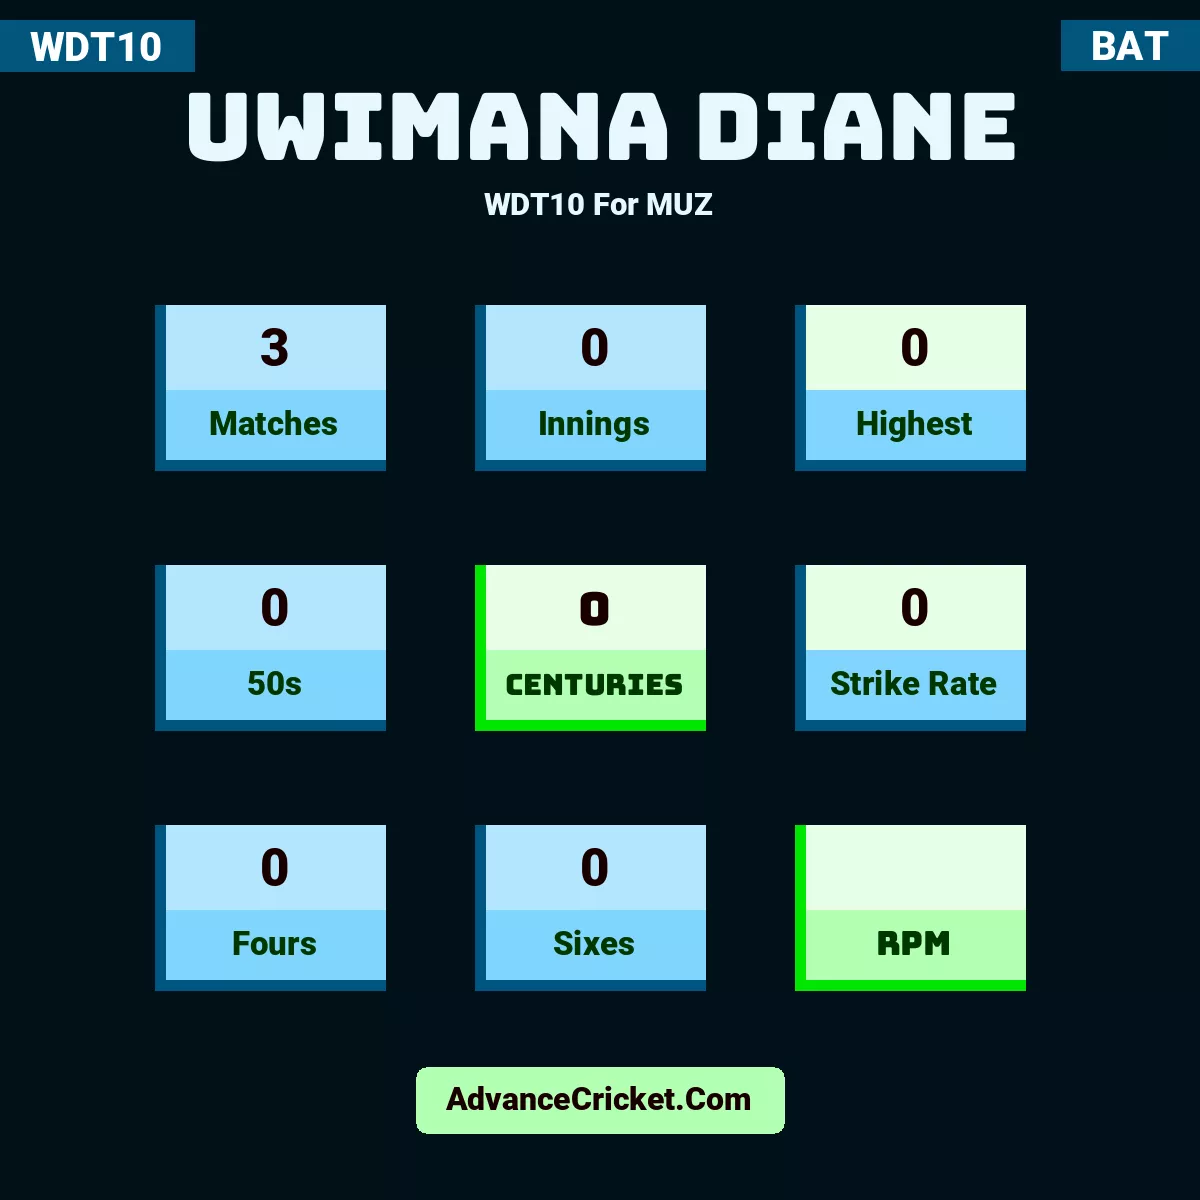 Uwimana Diane WDT10  For MUZ, Uwimana Diane played 3 matches, scored 0 runs as highest, 0 half-centuries, and 0 centuries, with a strike rate of 0. U.Diane hit 0 fours and 0 sixes.